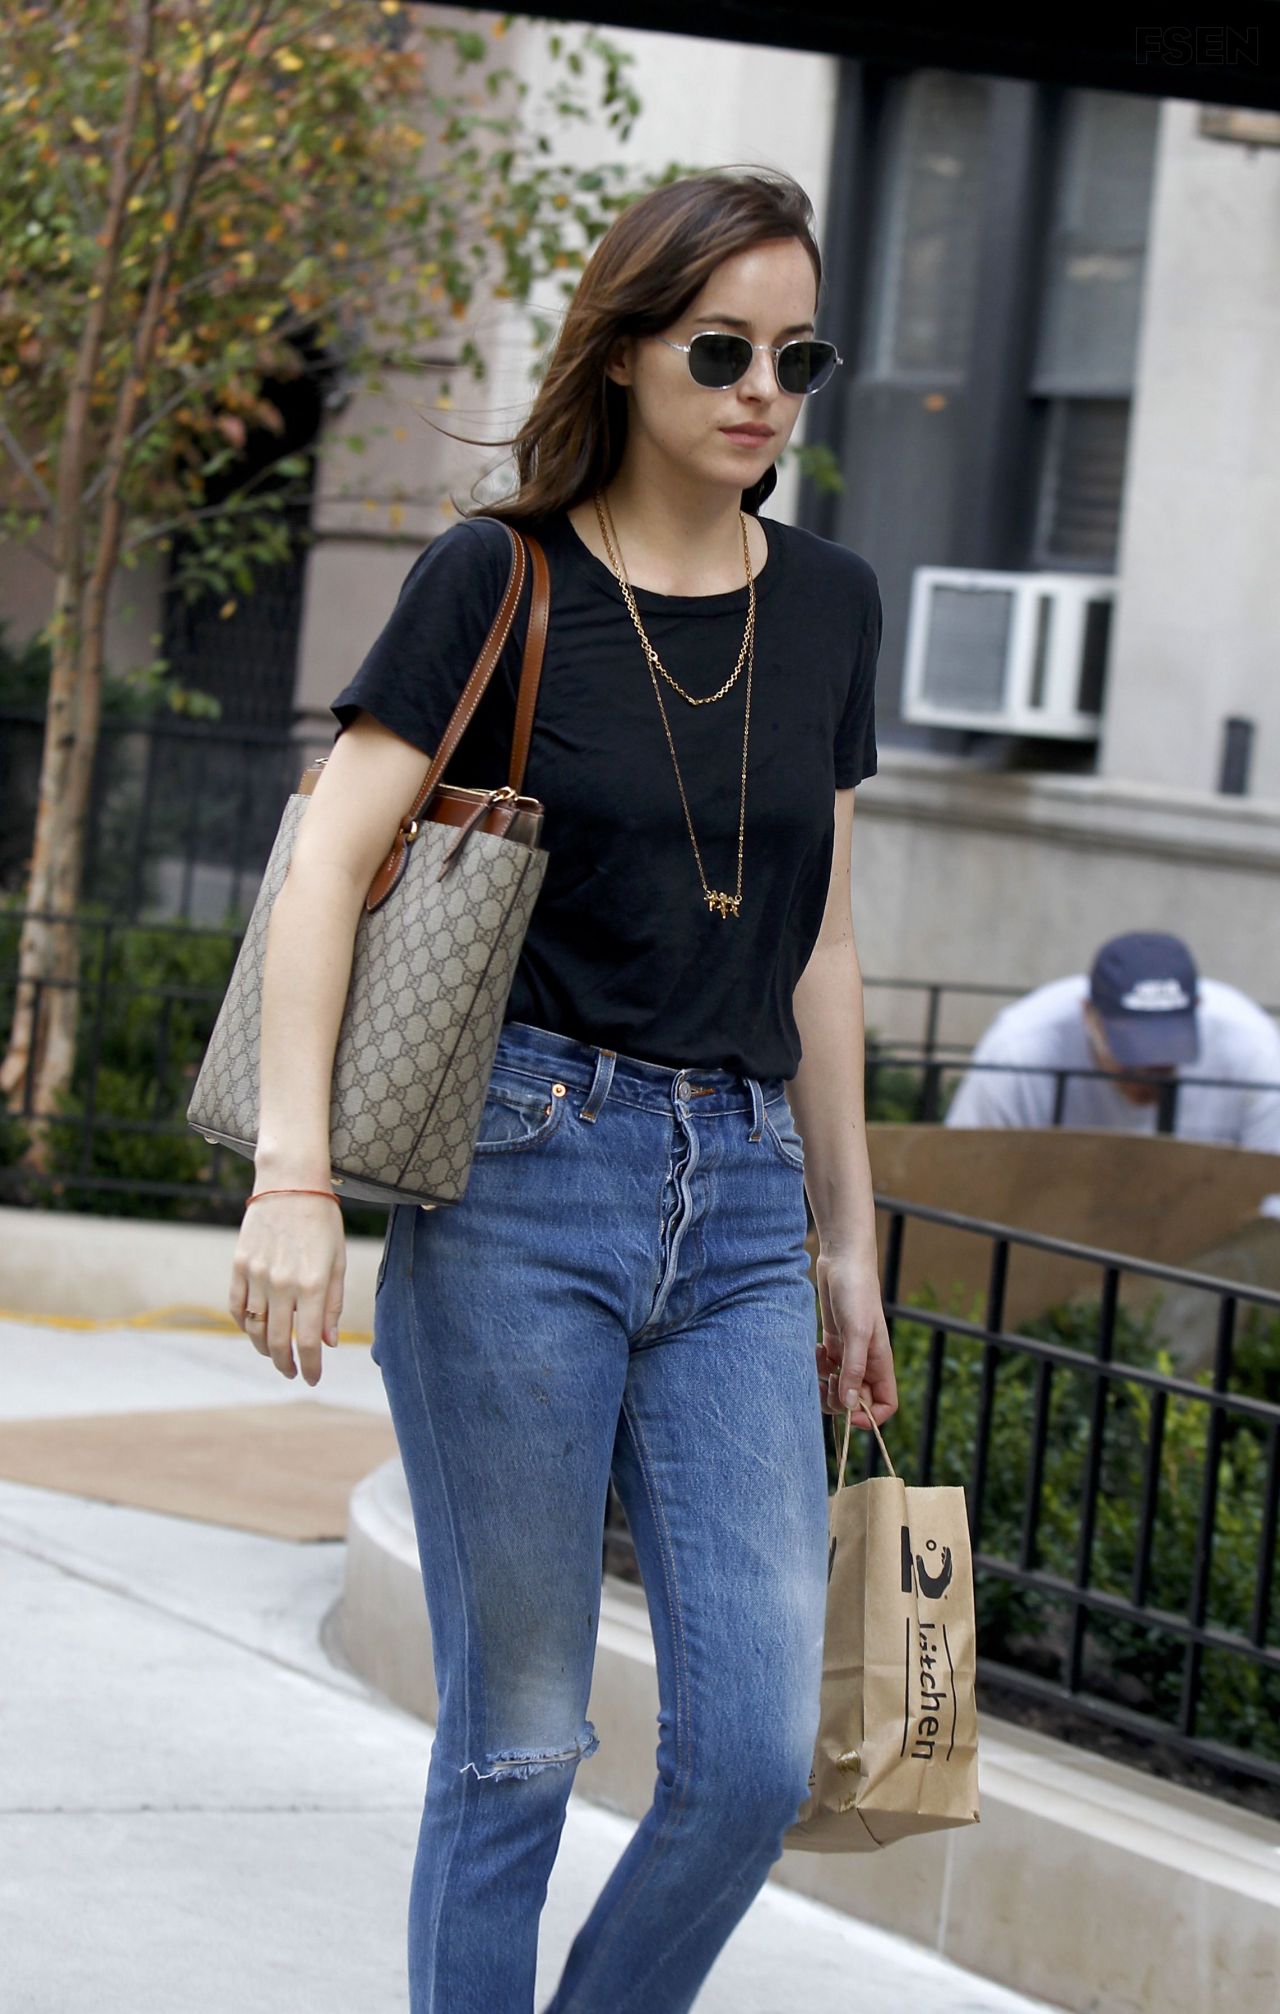 dakota-johnson-out-and-about-in-new-york-city-10-19-2016-1.jpg